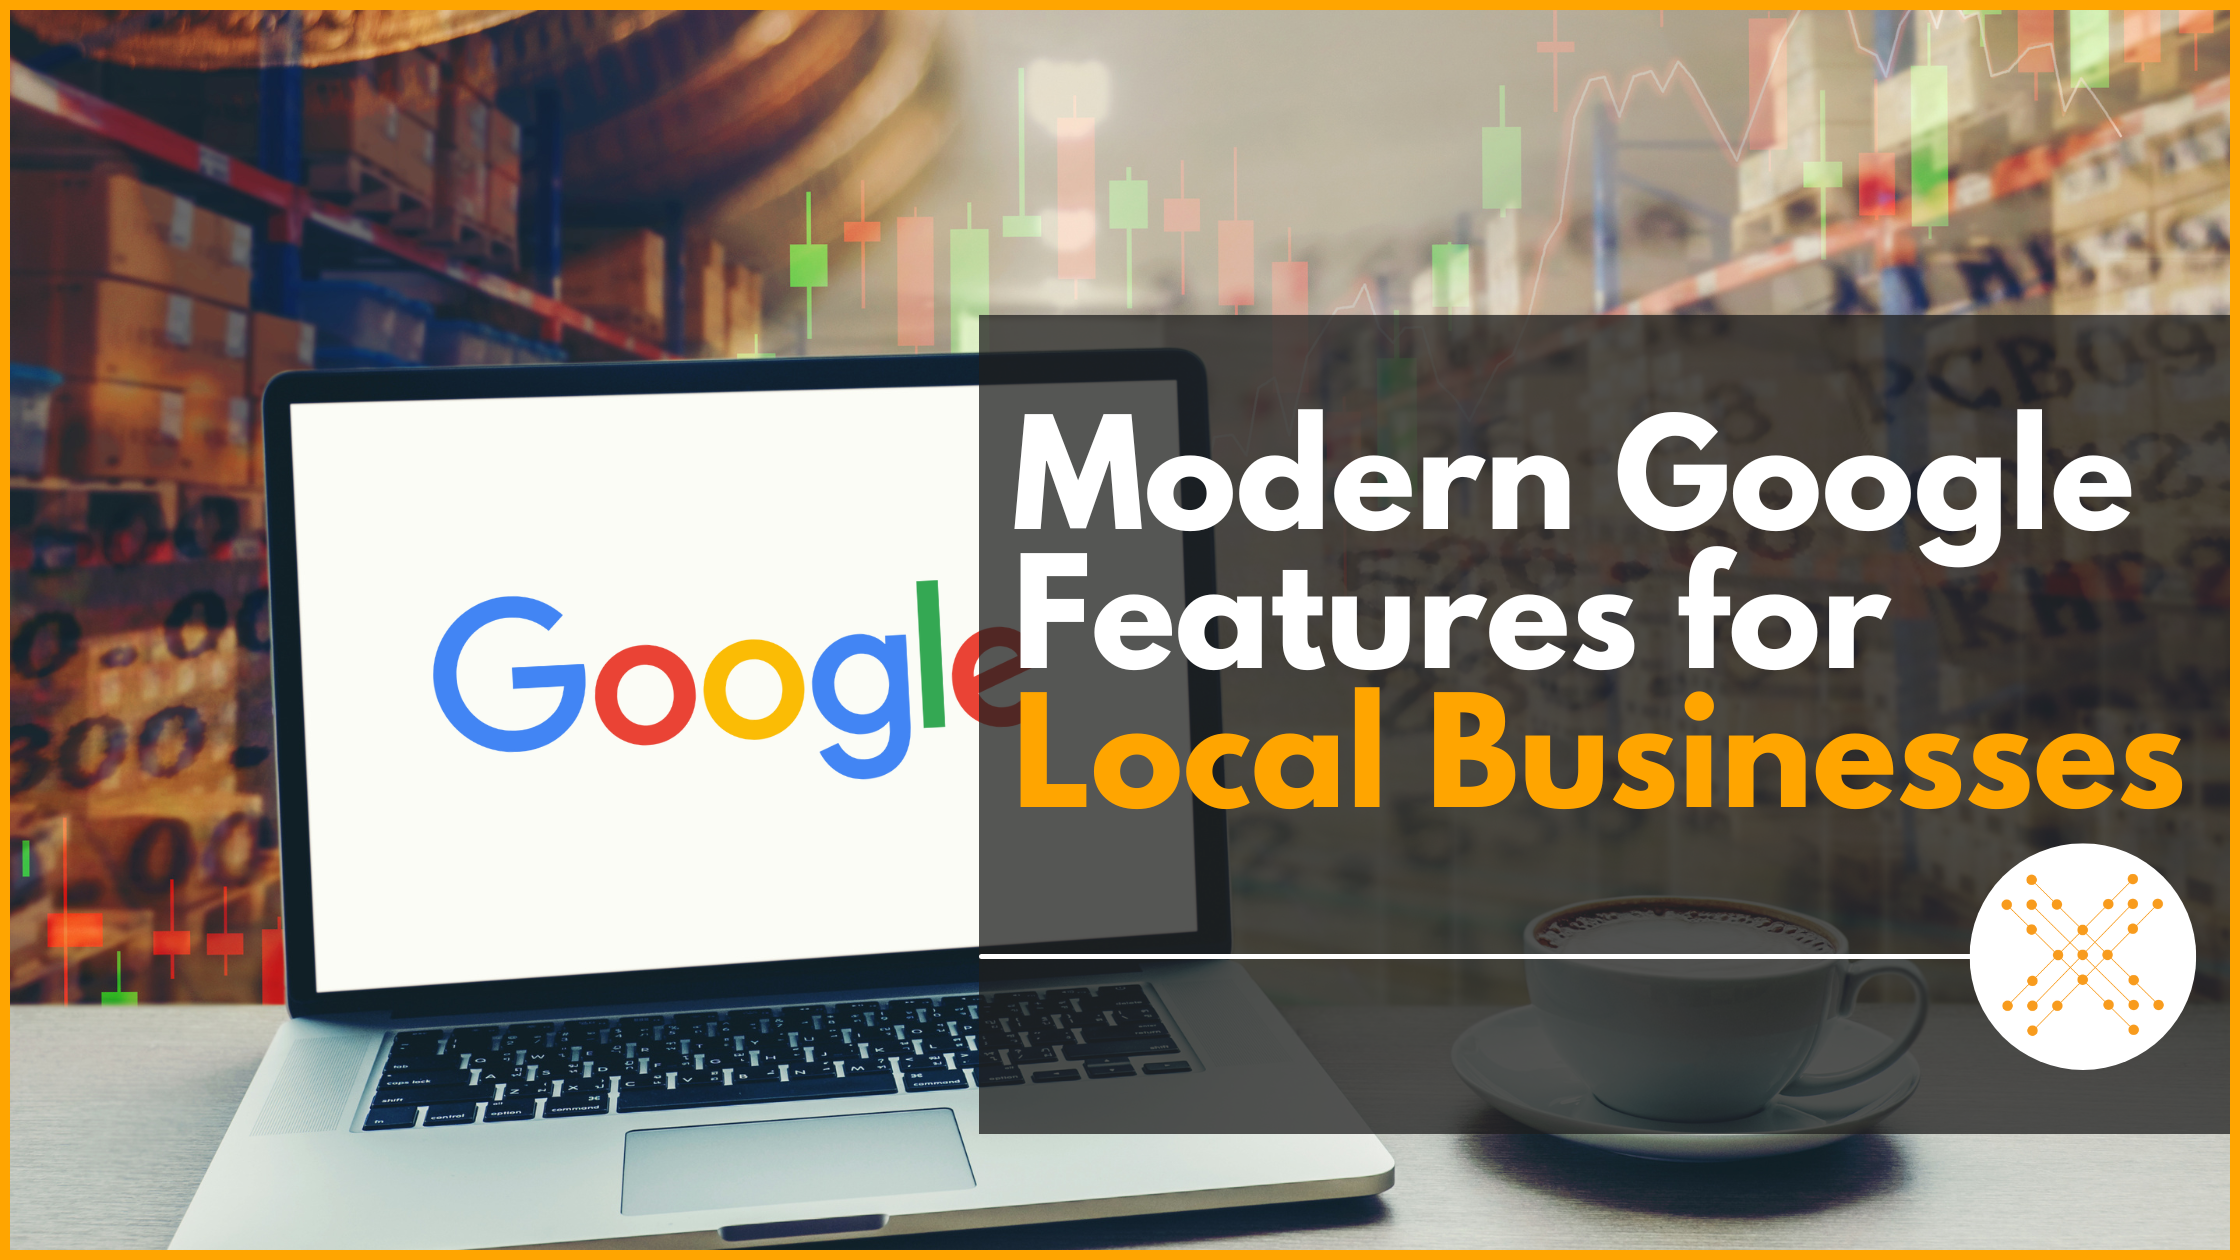 Modern Google Features for Local Businesses